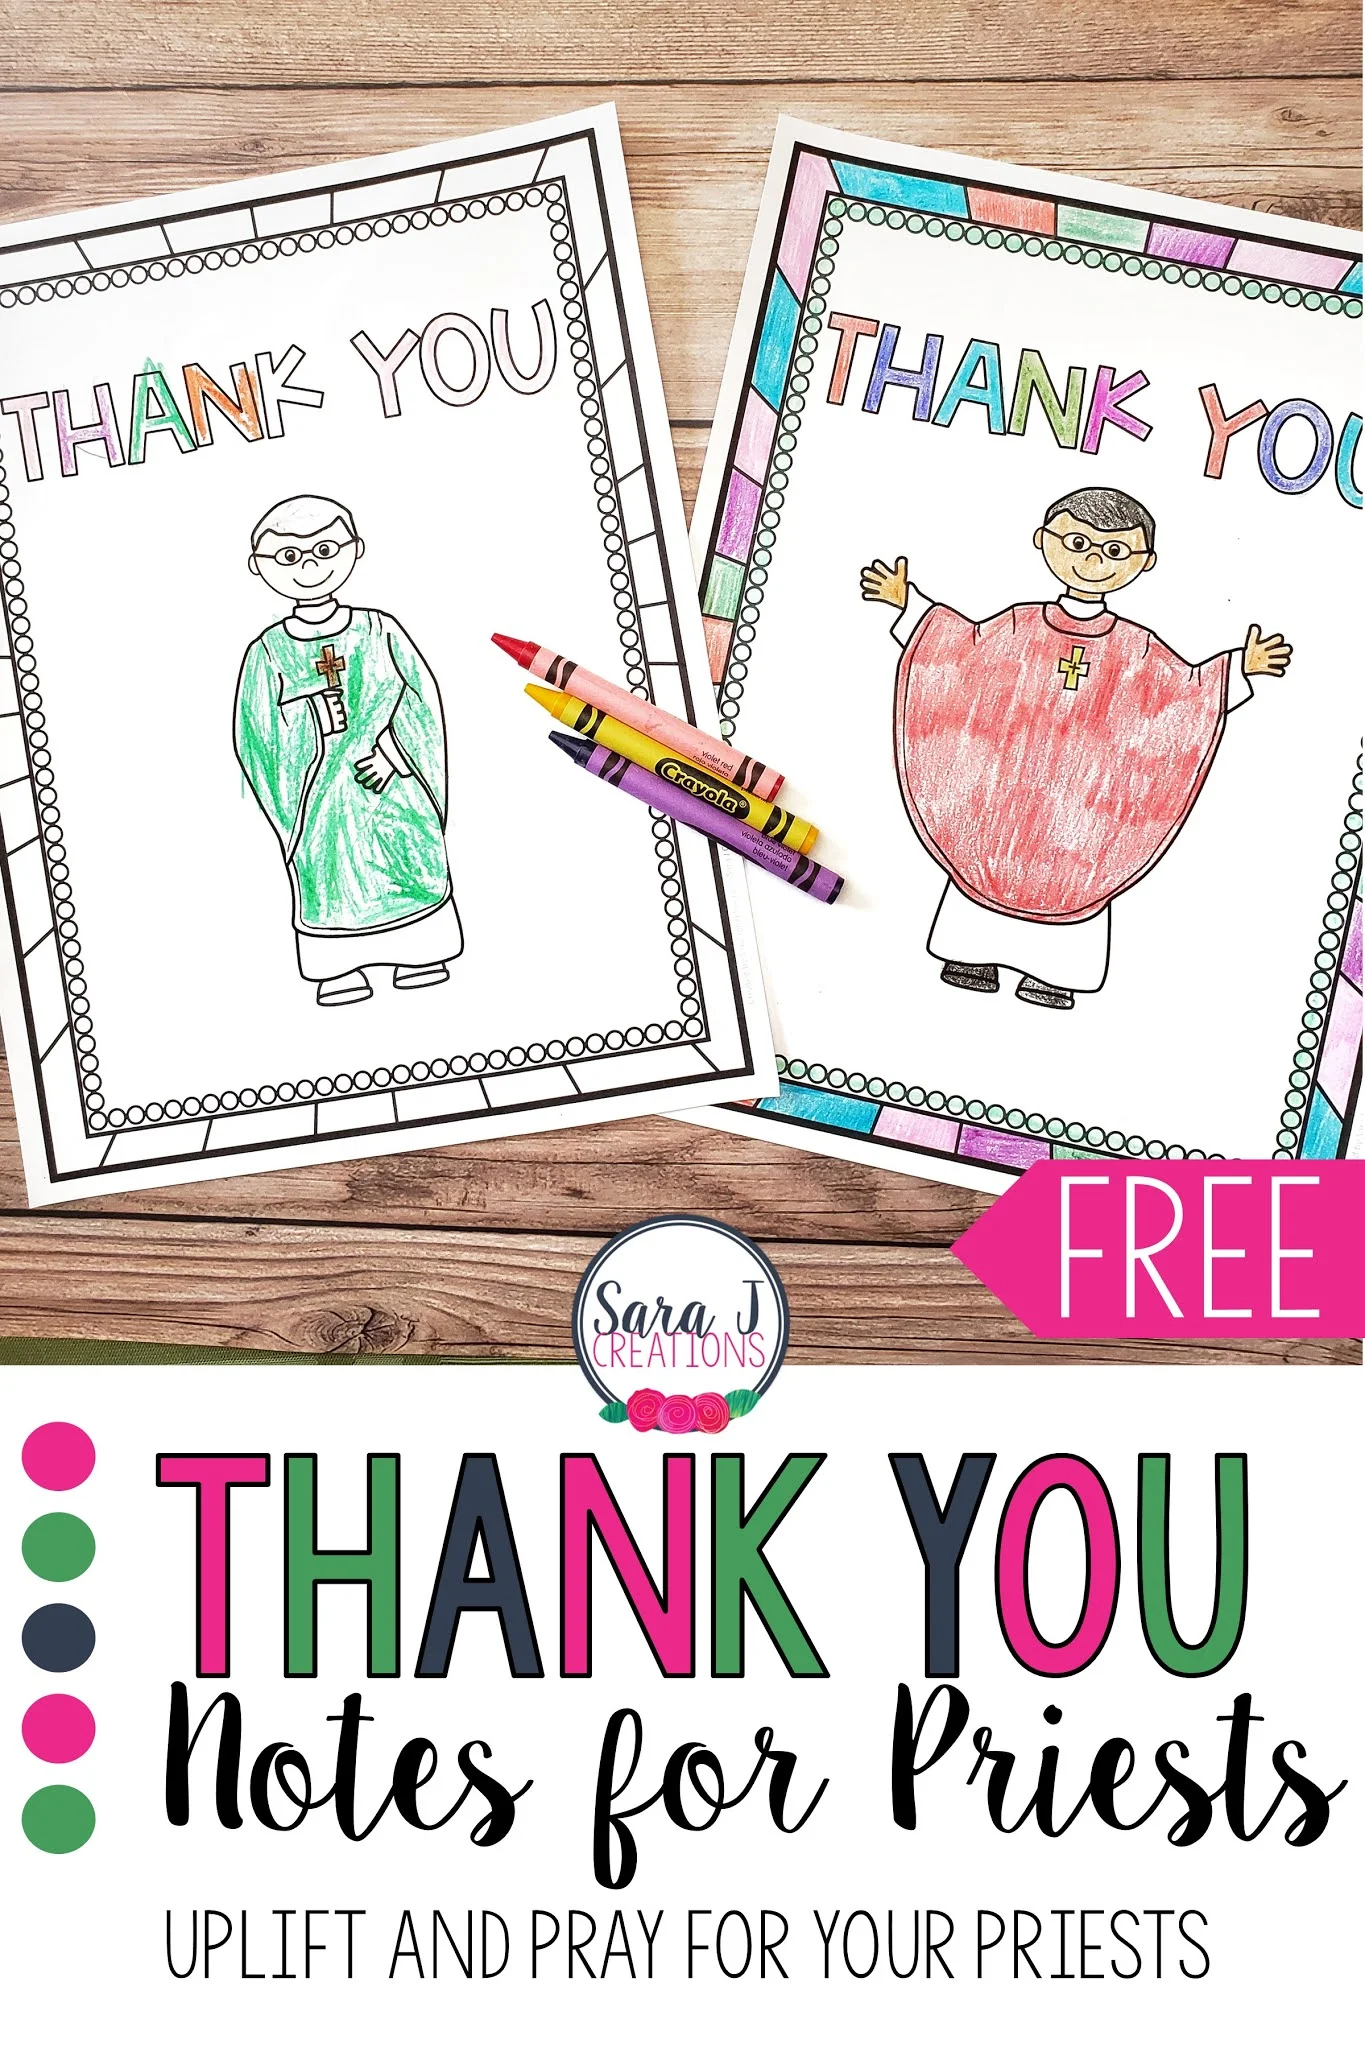 Help your students stay connected to the members of their church with these FREE thank you cards for priests!